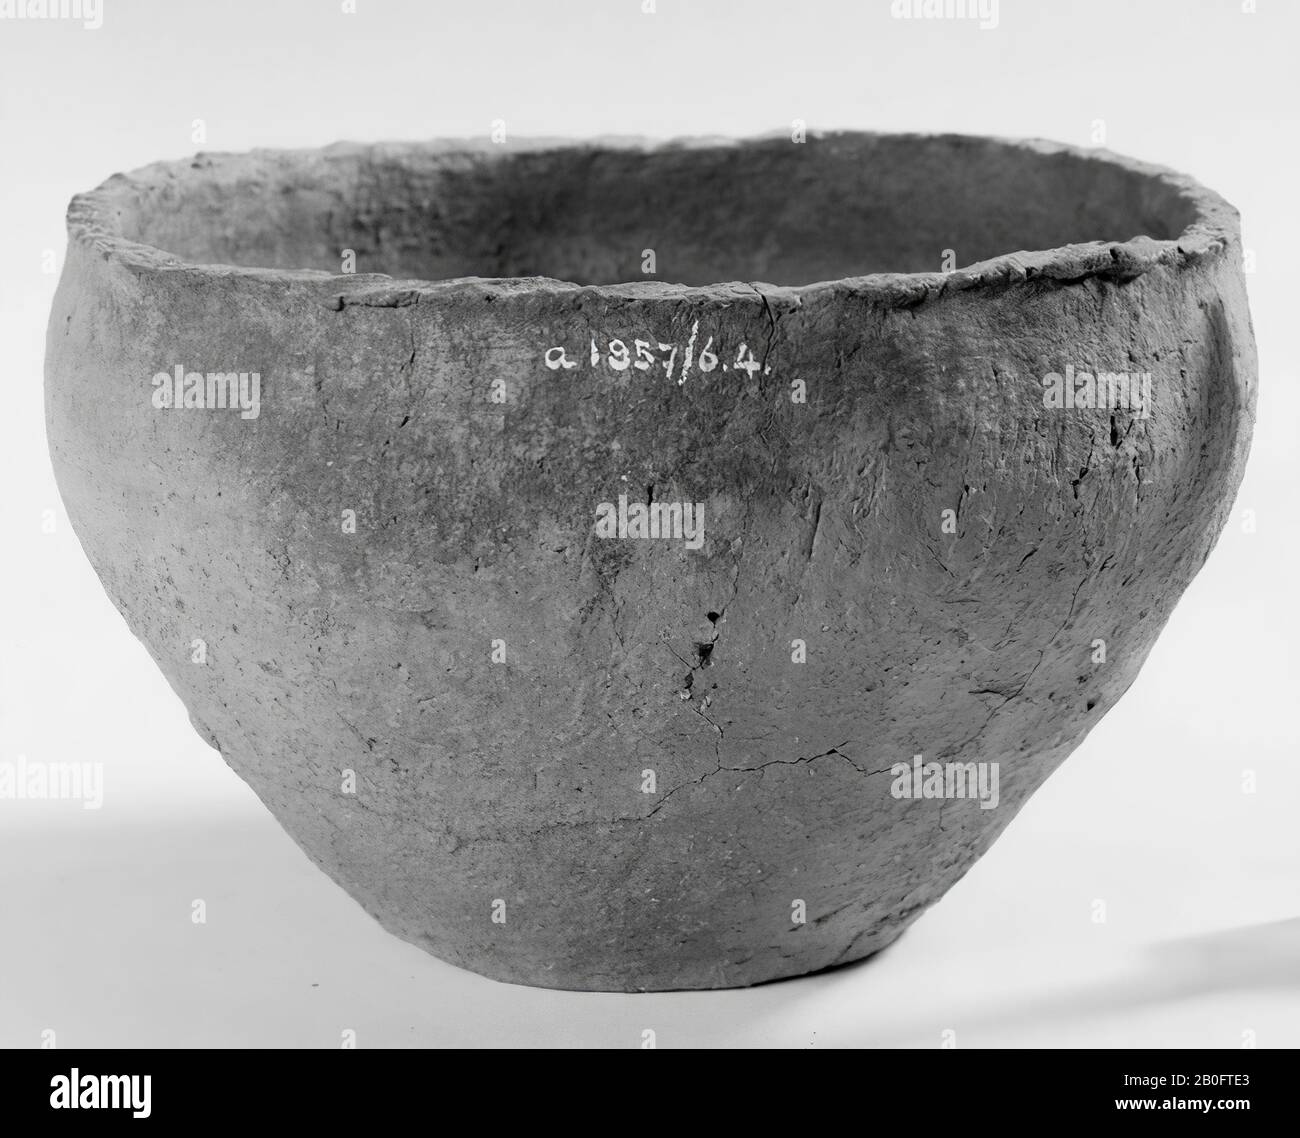 Bowl from yellow to dark gray earthenware, serrated on top of the edge. Many surface cracks., Bowl, earthenware, h: 10.7 cm, diam: 16.6 cm, prehistory 250 BC-100 AD, Netherlands, Friesland, Ferwerderadiel, Janum Stock Photo